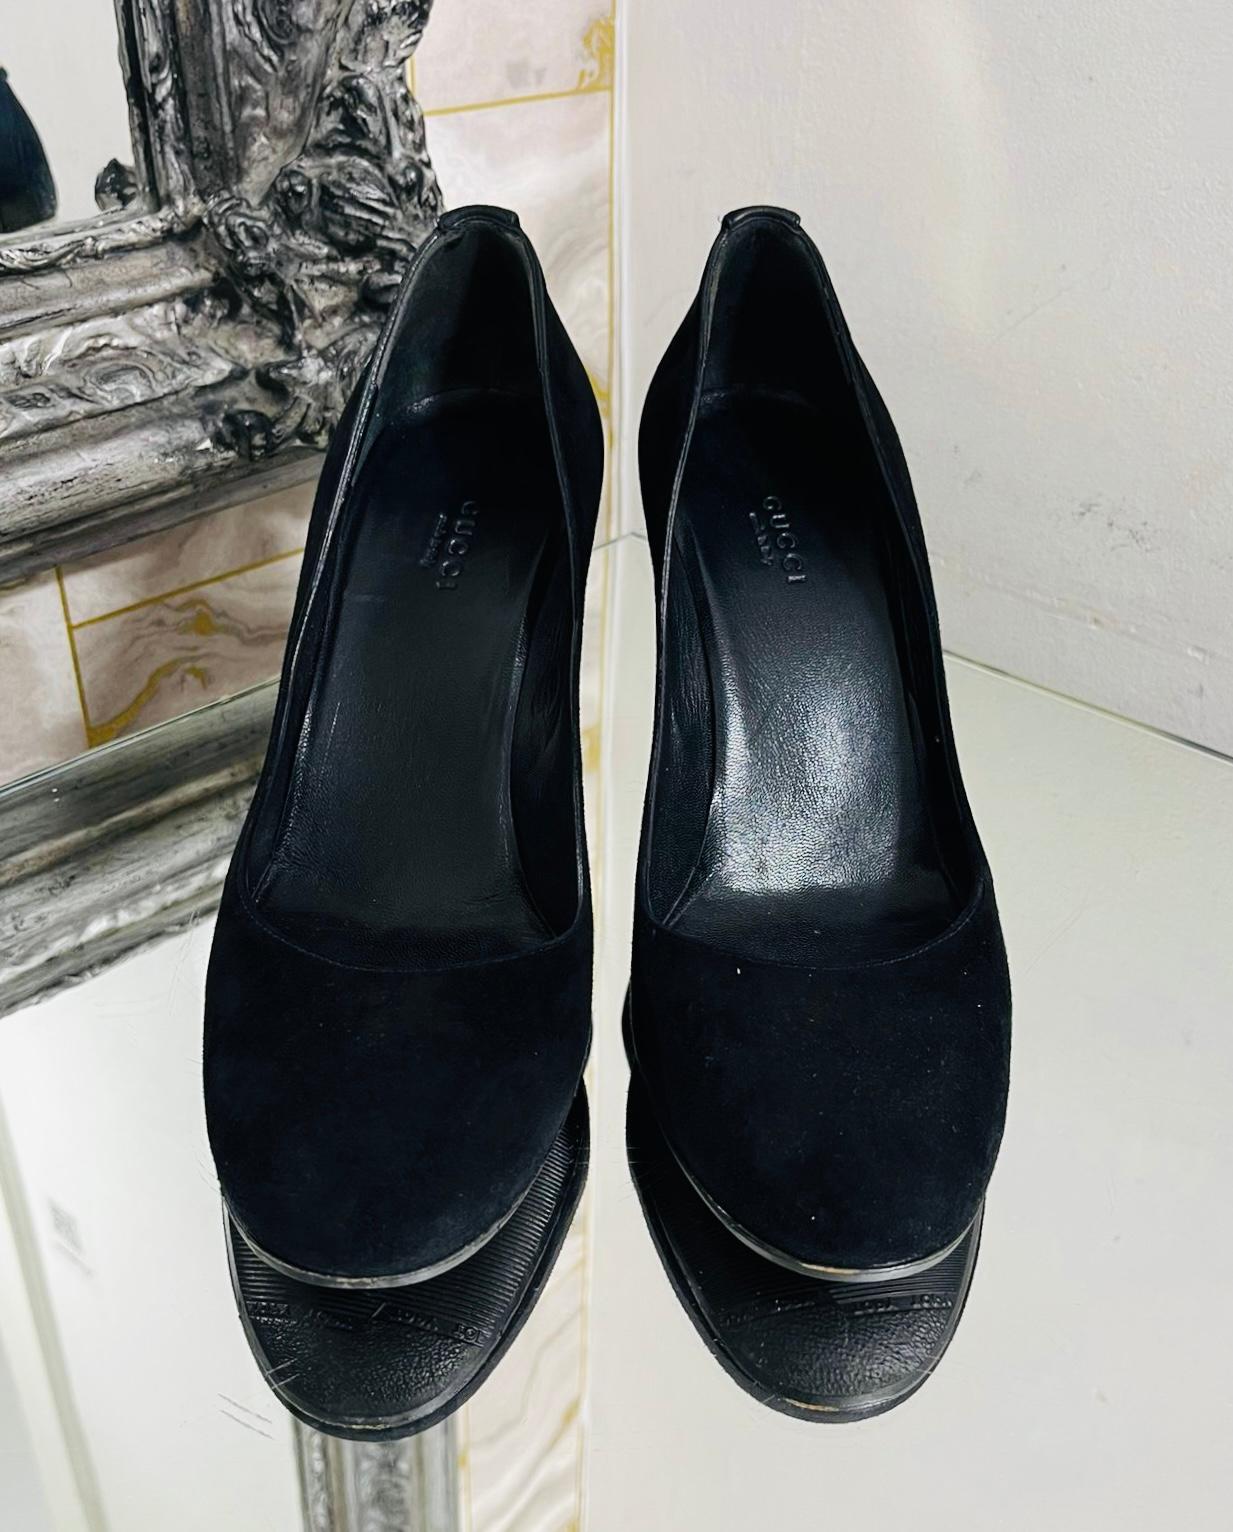 Gucci Suede GG Wedge Pumps

Black heels  designed with metallic gold wedge and gold 'GG' logo to the heel.

Detailed with round toe and leather lining and insoles.

Size – 39.5

Condition – Good (Scratches to the wedges)

Composition – Suede

Comes